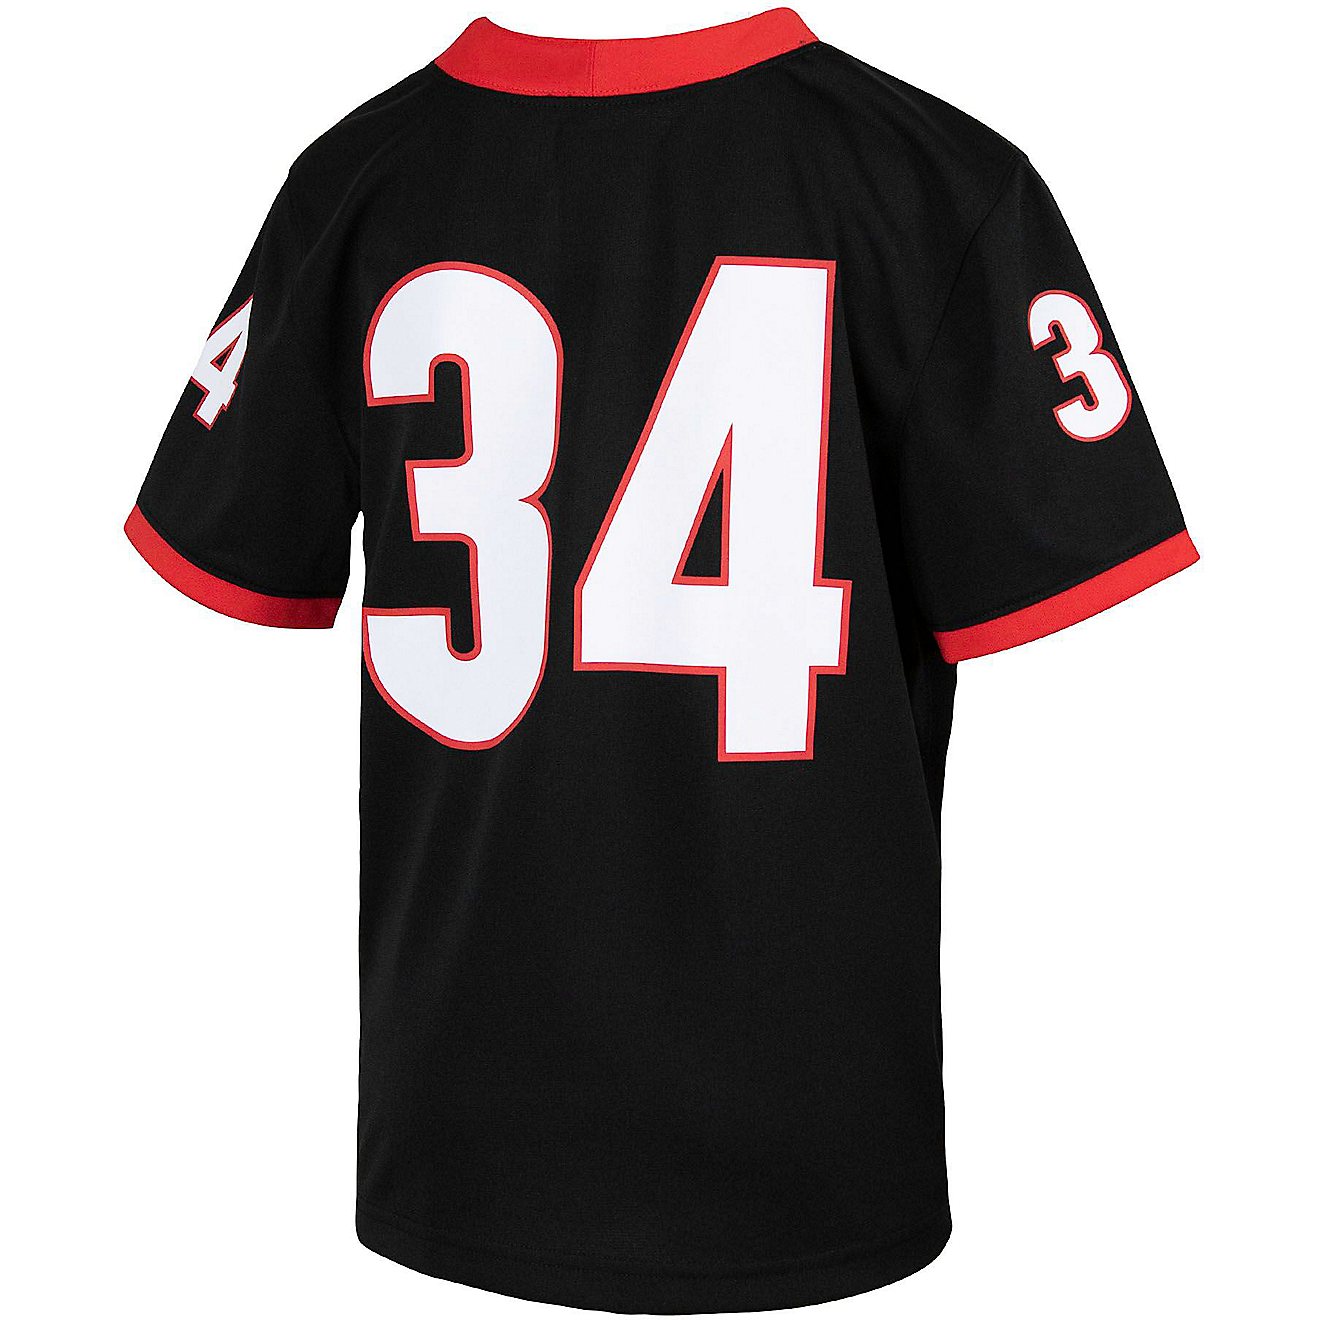 Nike Boys' University of Georgia Young Athletes Replica Football Jersey                                                          - view number 2